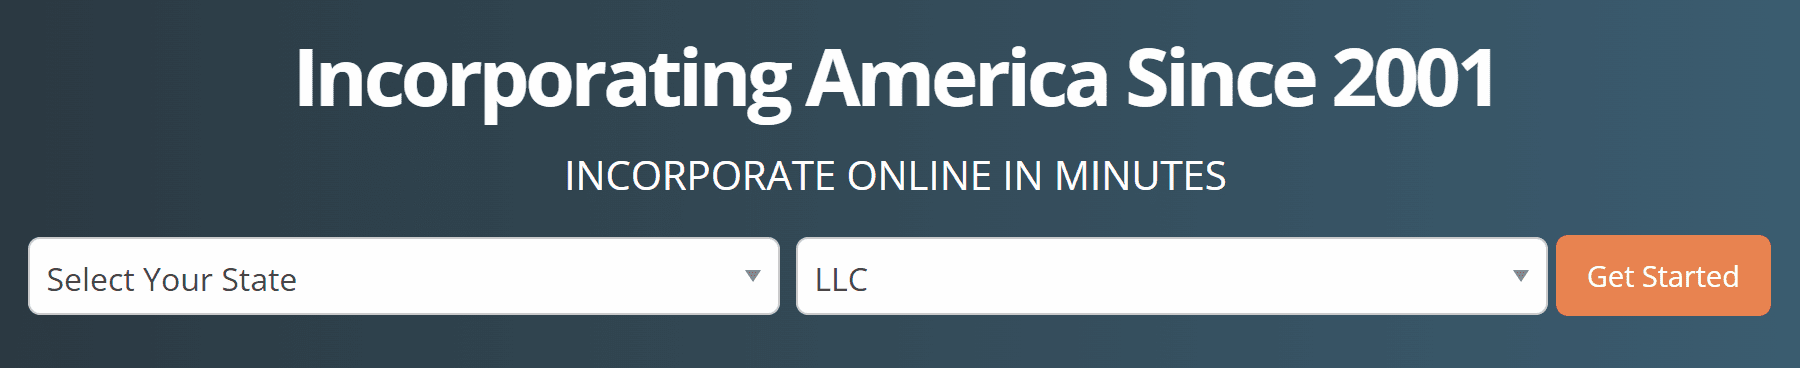 Active Filings boasts they can incorporate your business online within minutes.